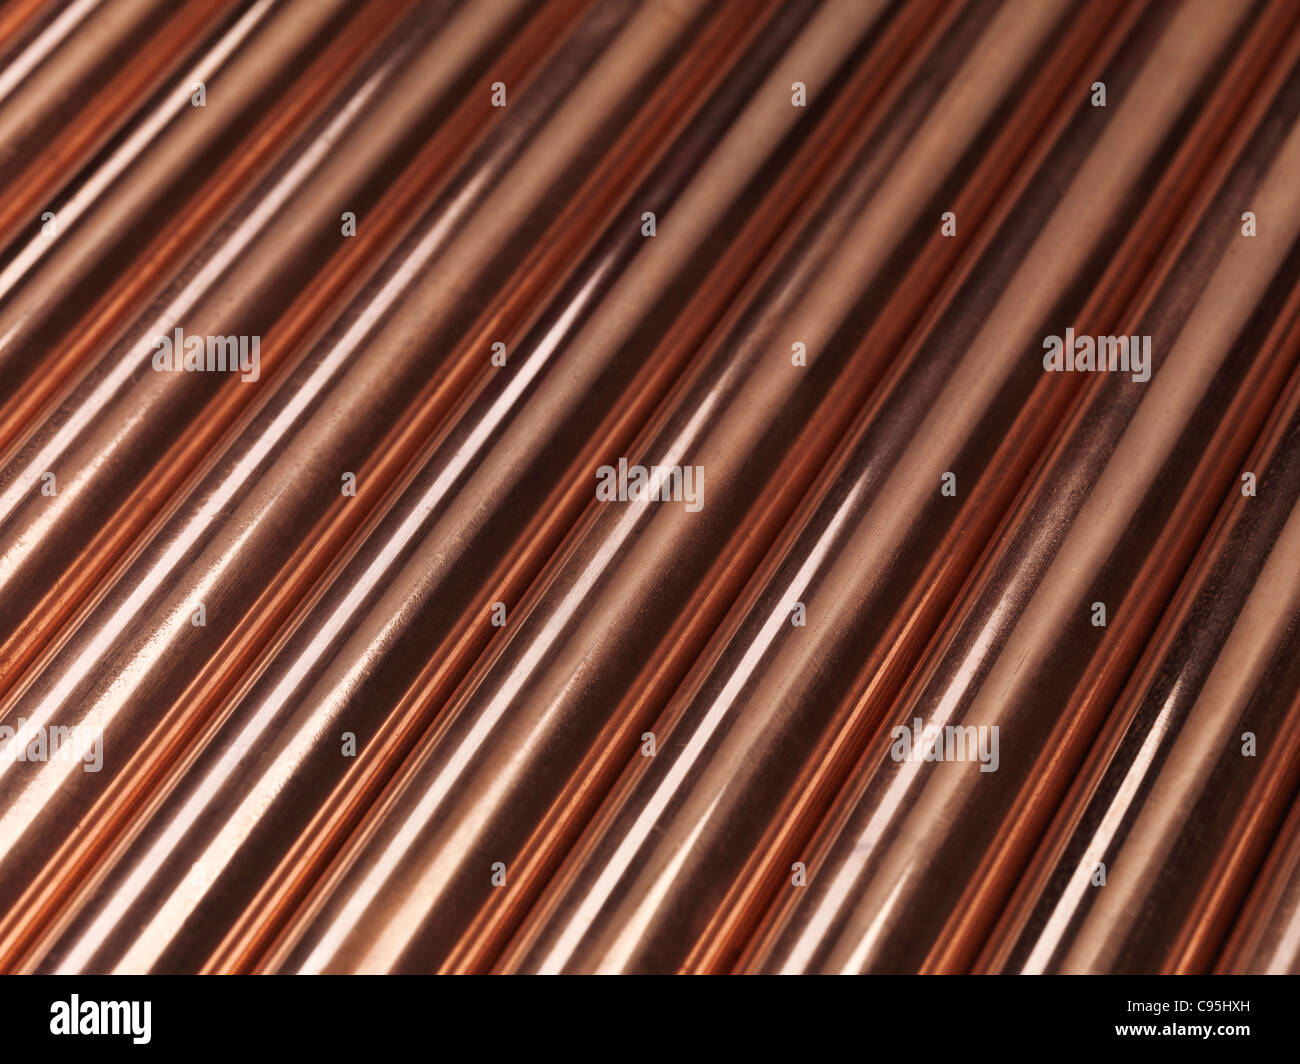 Shiny plumbing copper tubes abstract artistic background Stock Photo